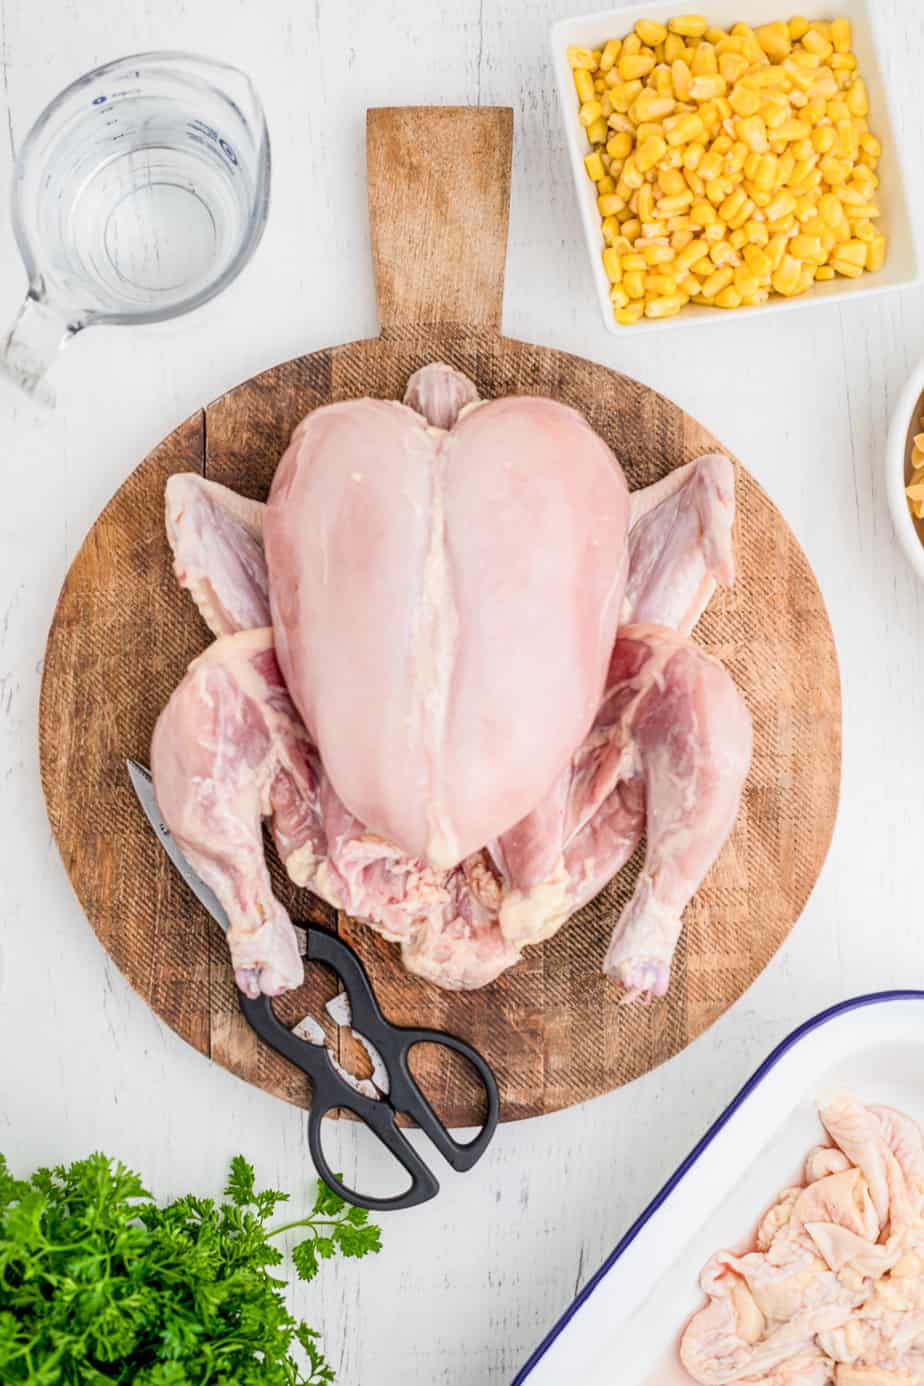 A whole raw chicken on a round cutting board with skin removed from above next to kitchen sheers, a pan full of chicken skin pieces, fresh parsley, corn in a bowl and water in a glass measuring cup on a counter from above.